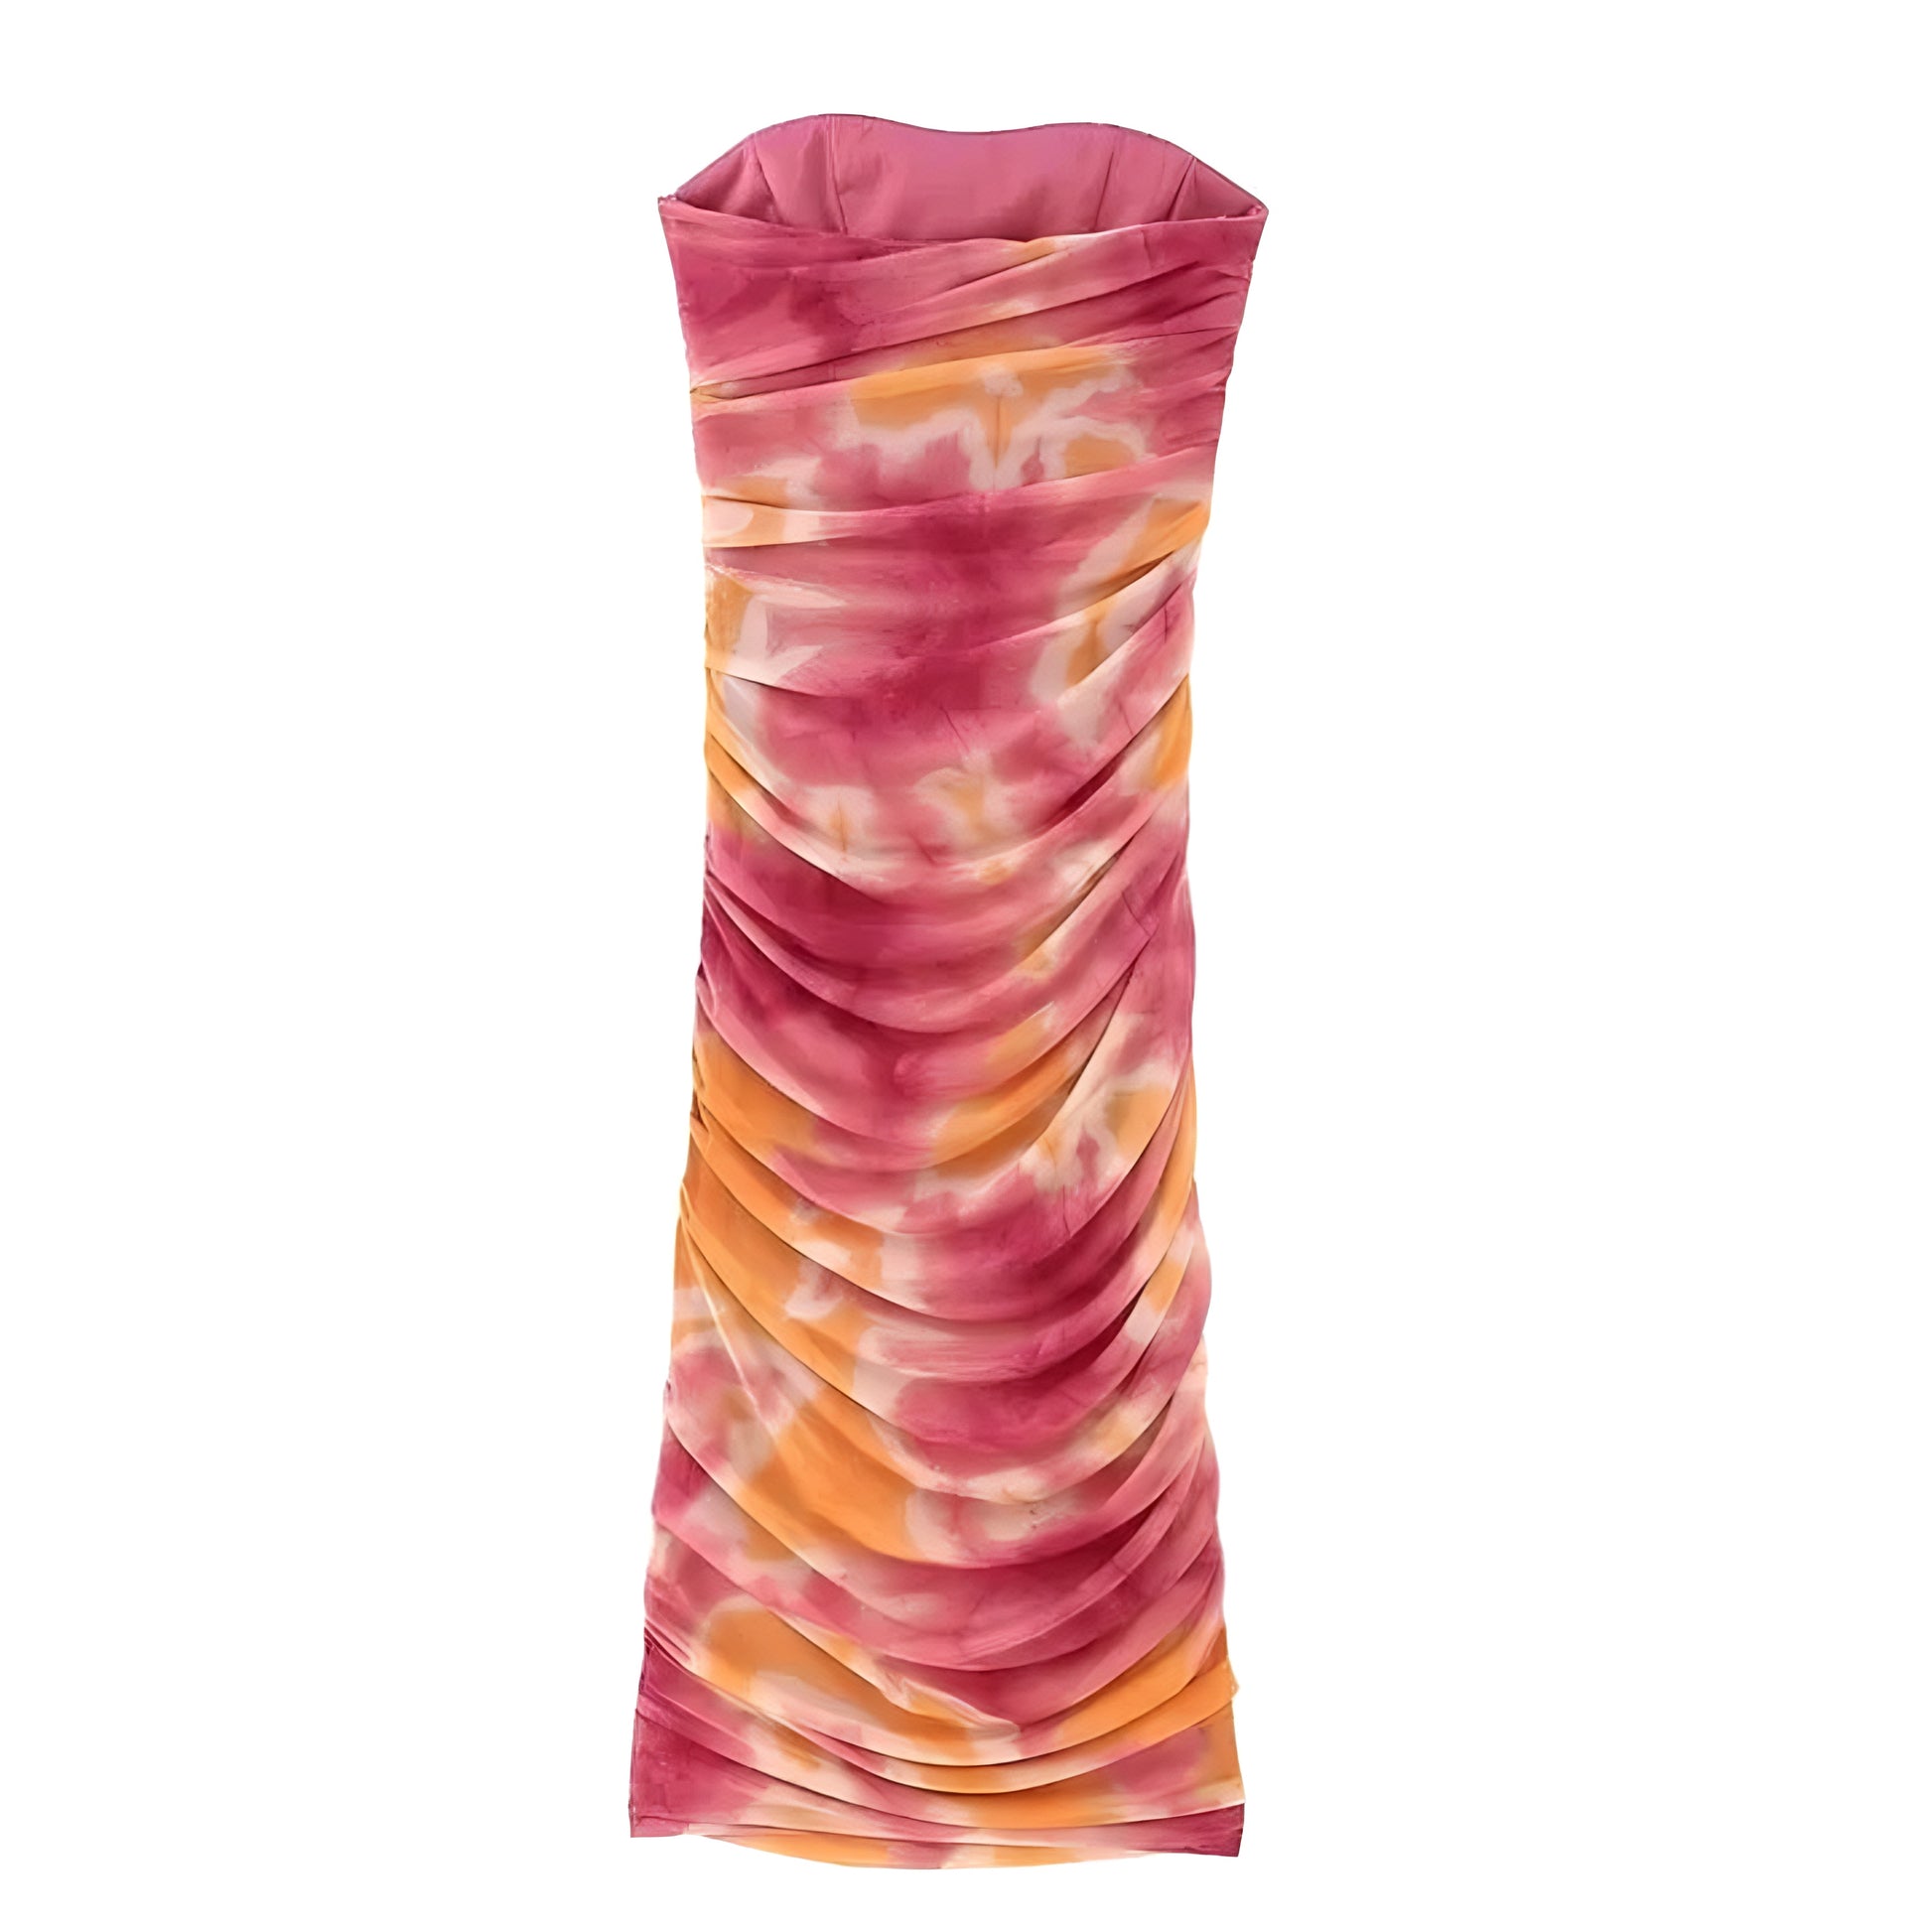 red-orange-multi-color-tie-dye-patterned-slim-fit-bodycon-ruched-draped-layered-ruffle-strapless-bandeau-sleeveless-midi-long-maxi-dress-evening-gown-women-ladies-chic-trendy-spring-2024-summer-casual-semi-formal-prom-party-date-night-out-club-wear-sexy-cocktail-tropical-exotic-beach-vacation-sundress-zara-revolve-reformation-princess-polly-white-fox-fashion-nova